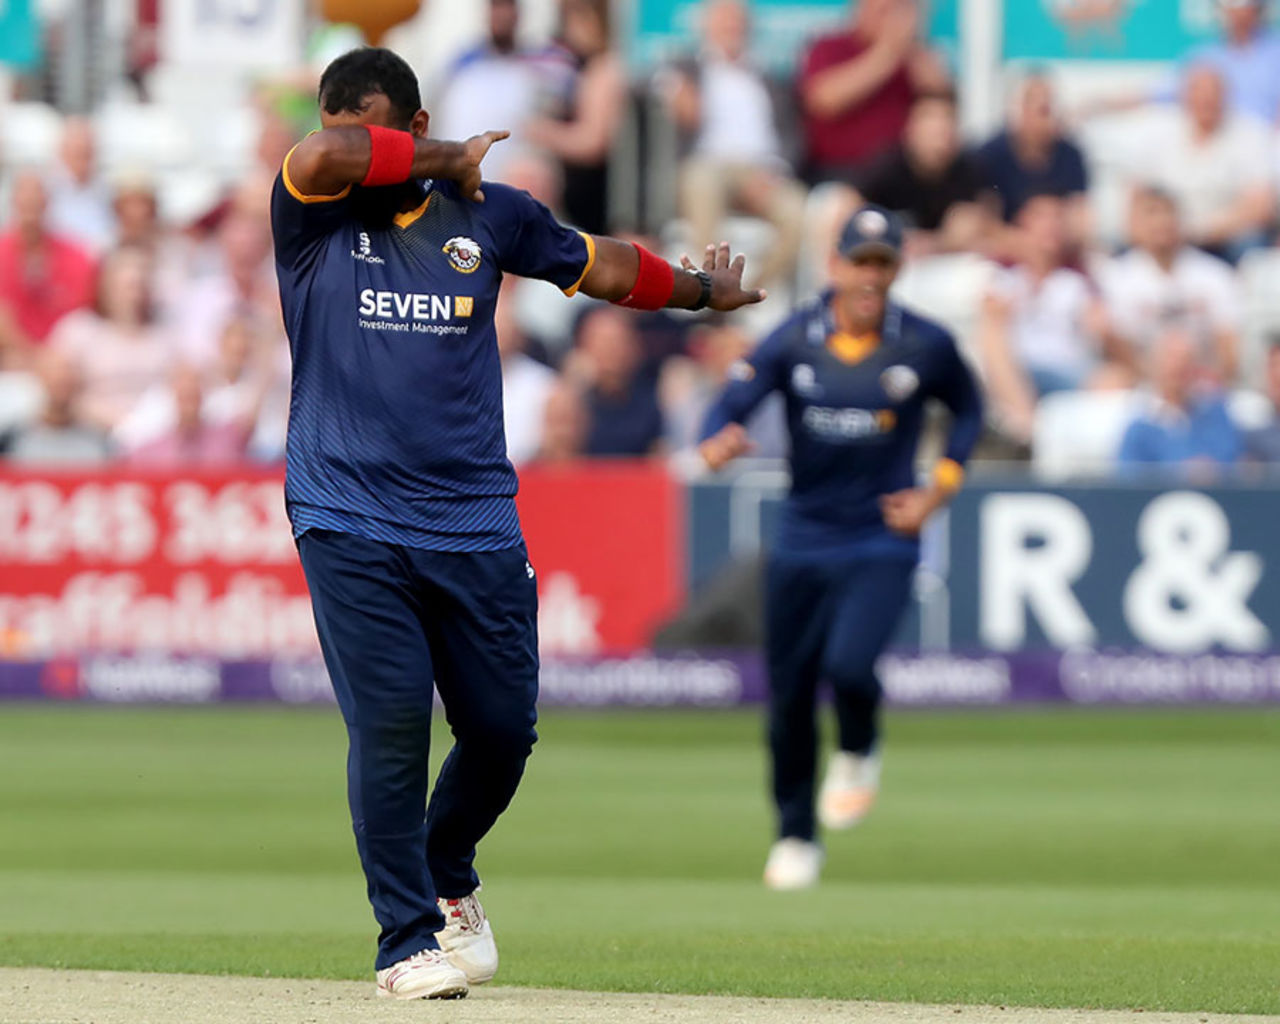 Ashar Zaidi 'dabs' after taking a wicket, Essex v Surrey, NatWest T20 Blast, South Group, Chelmsford, July 7, 2017